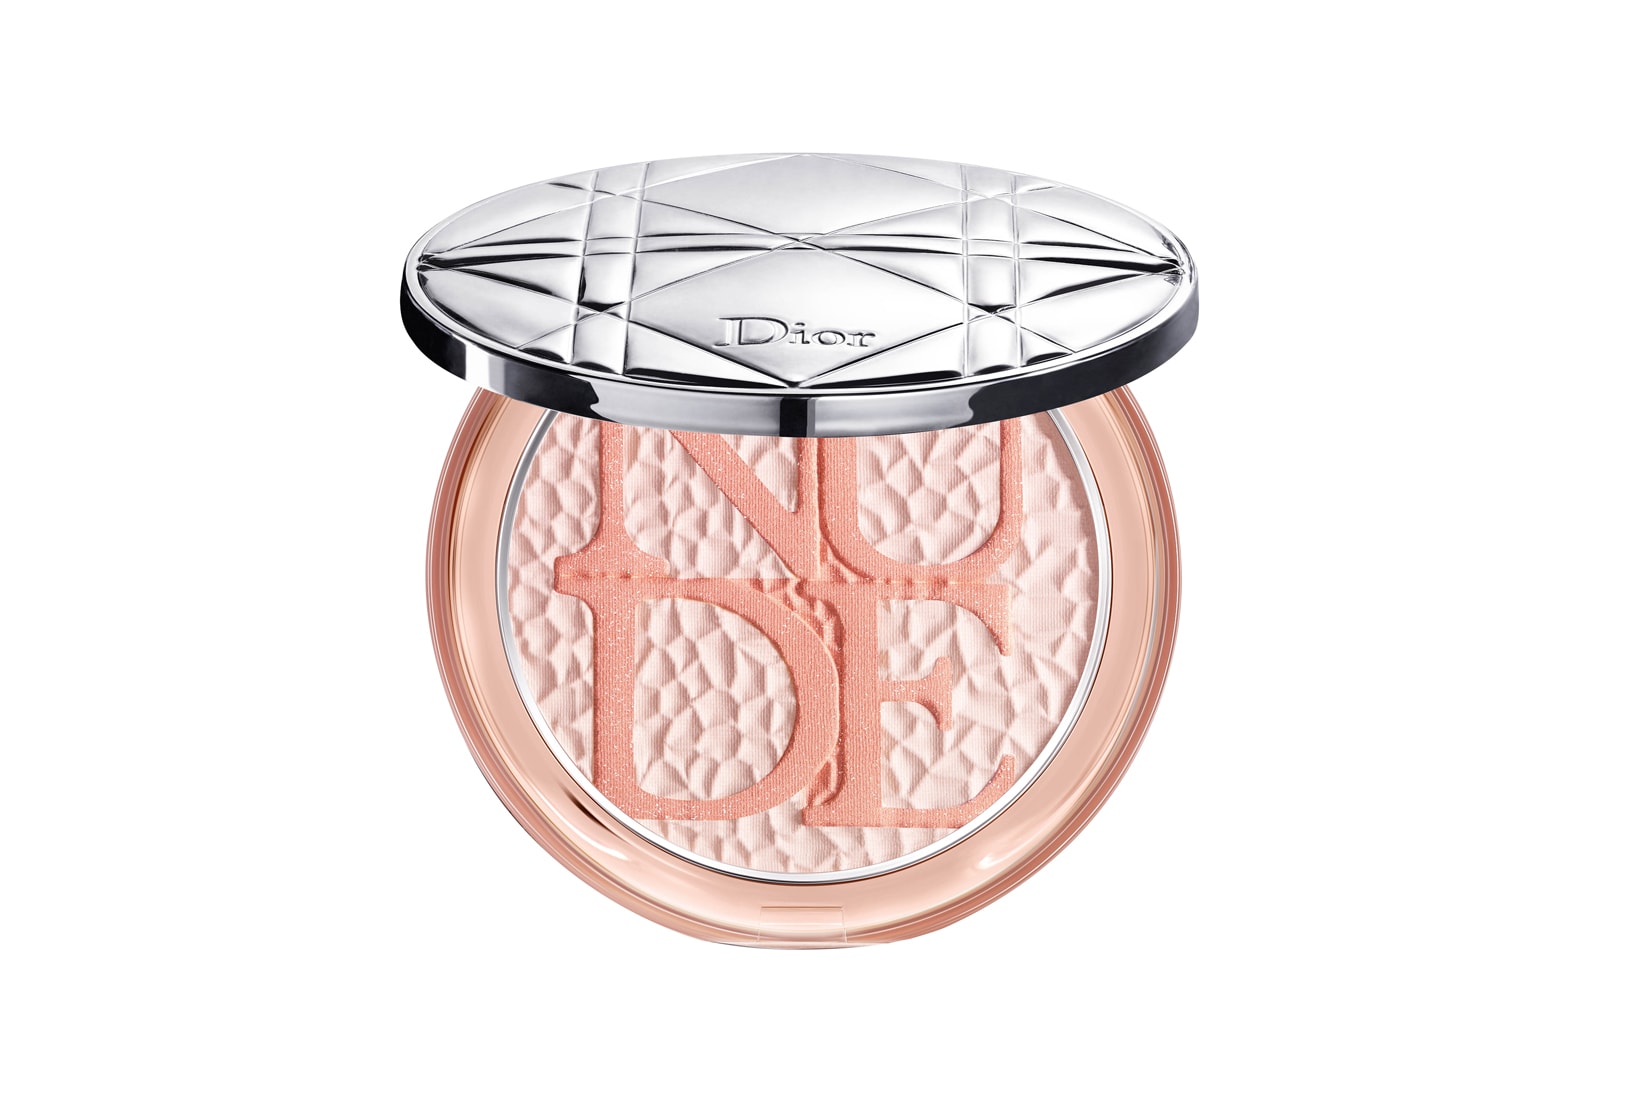 Dior Beauty Wild Earth Summer 2019 Collection Bronzer Mineral Nude Glow Pink Cream